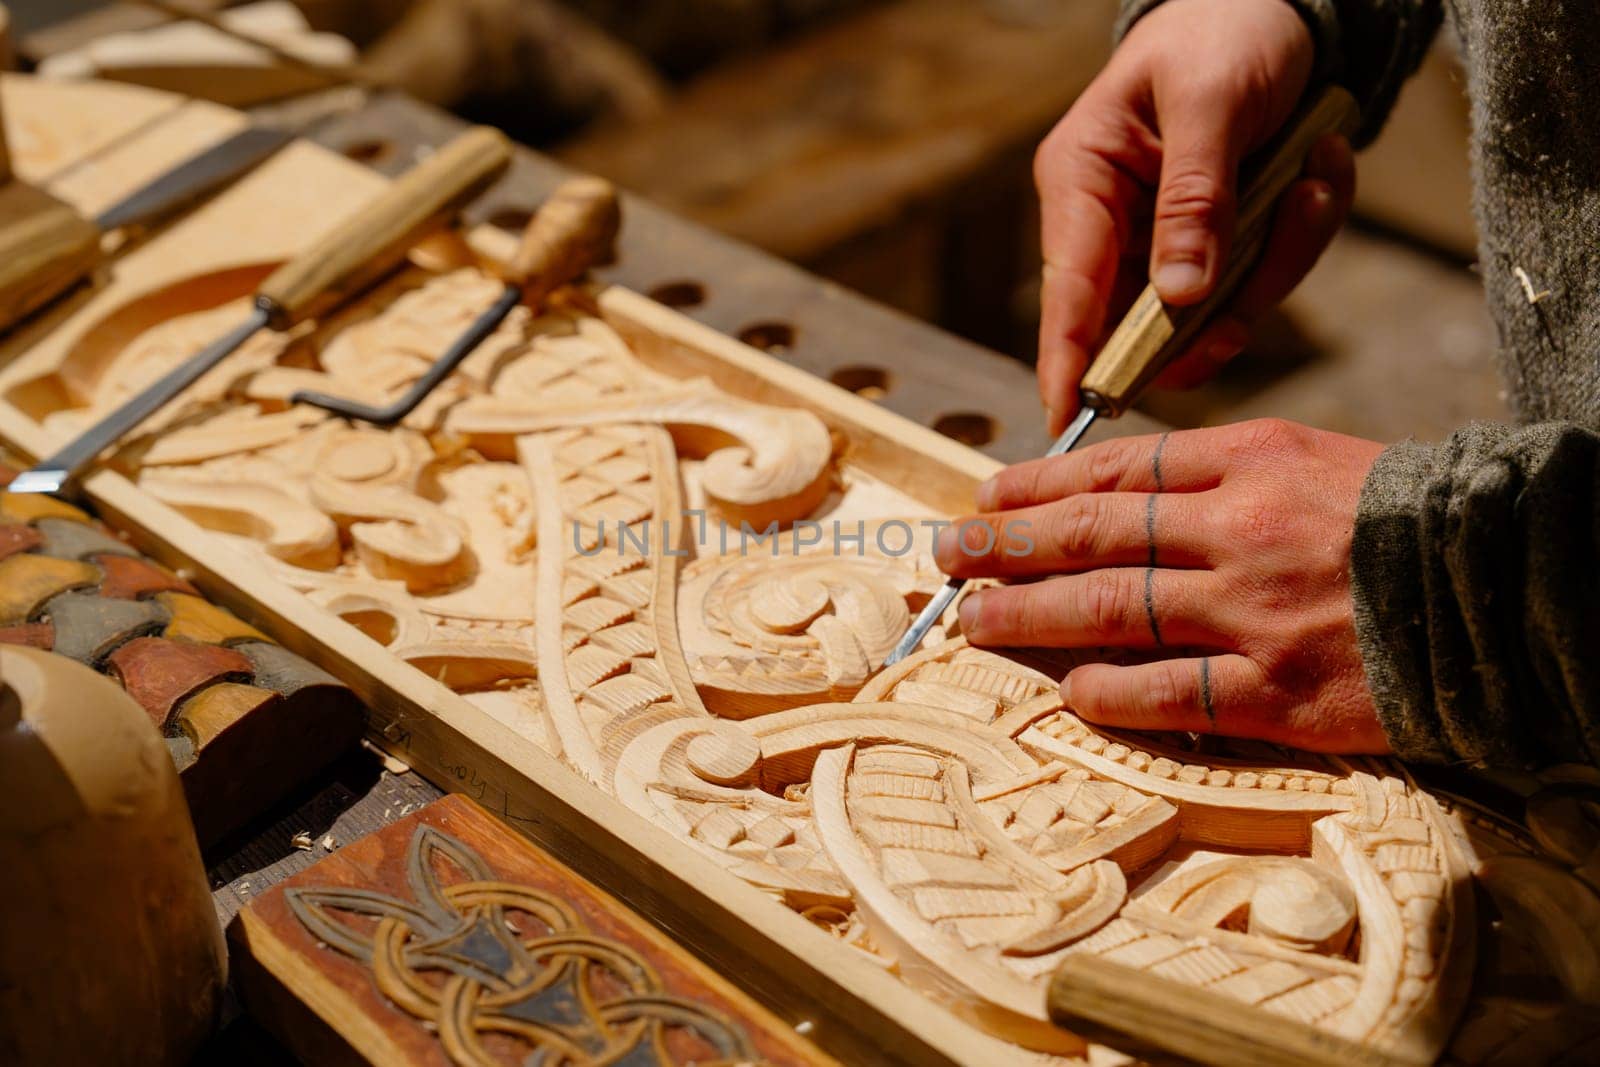 Artisan Carpenter Skillfully Carving Ornate Patterns on Wooden Surface by PhotoTime